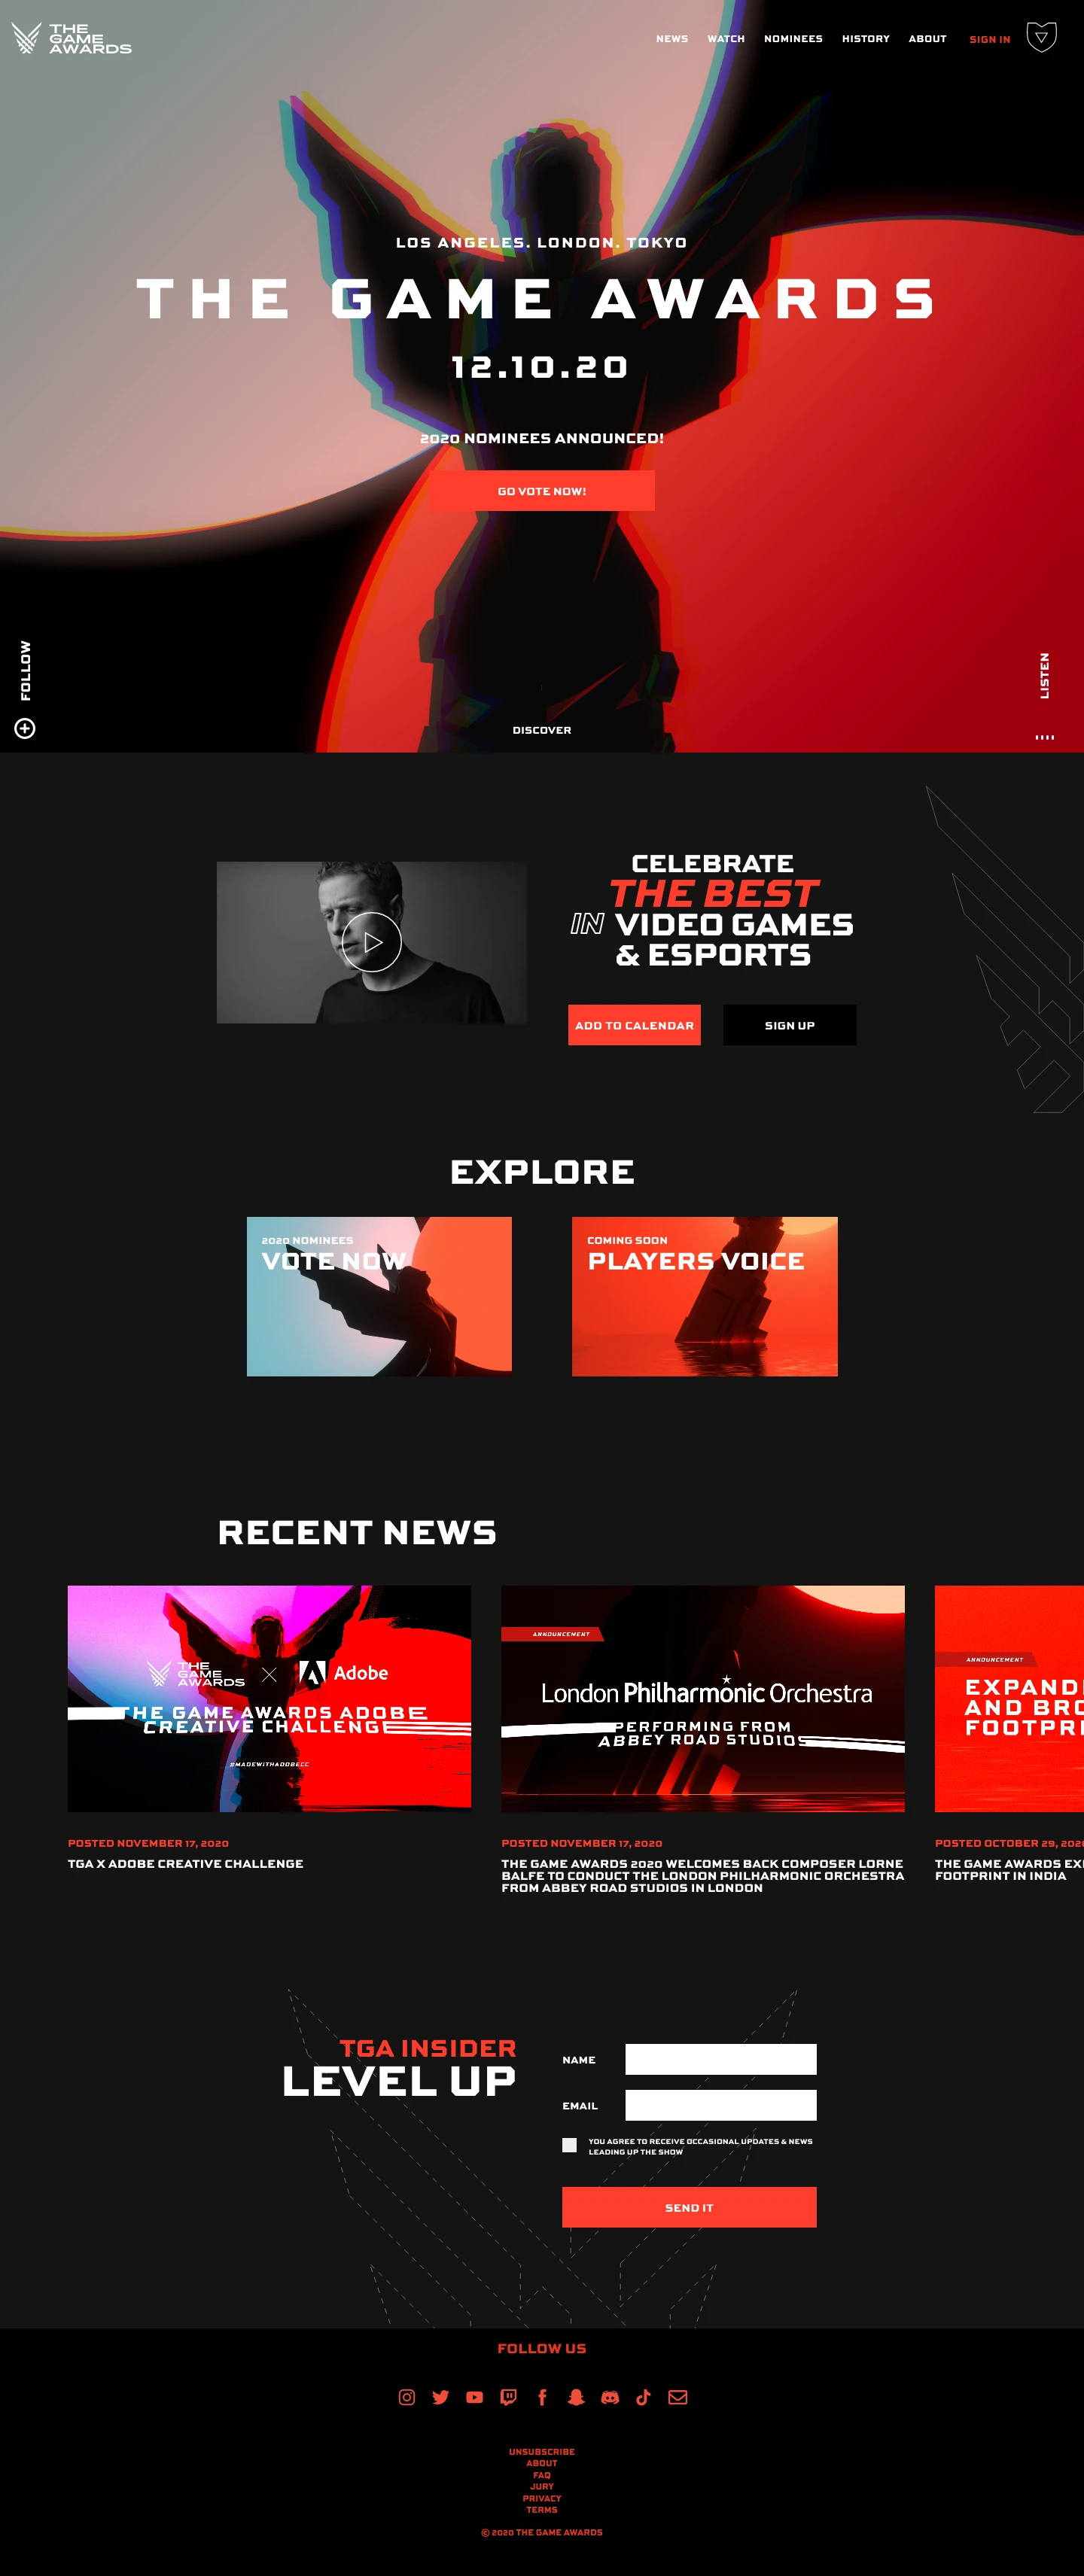 The Game Awards Landing Page Example: We bring together a diverse group of game developers, game players, and notable names from popular culture to celebrate and advance gaming’s position as the most immersive, challenging and inspiring form of entertainment. We strive to recognize those who improve the wellbeing of the community and elevate voices that represent the future of the medium.